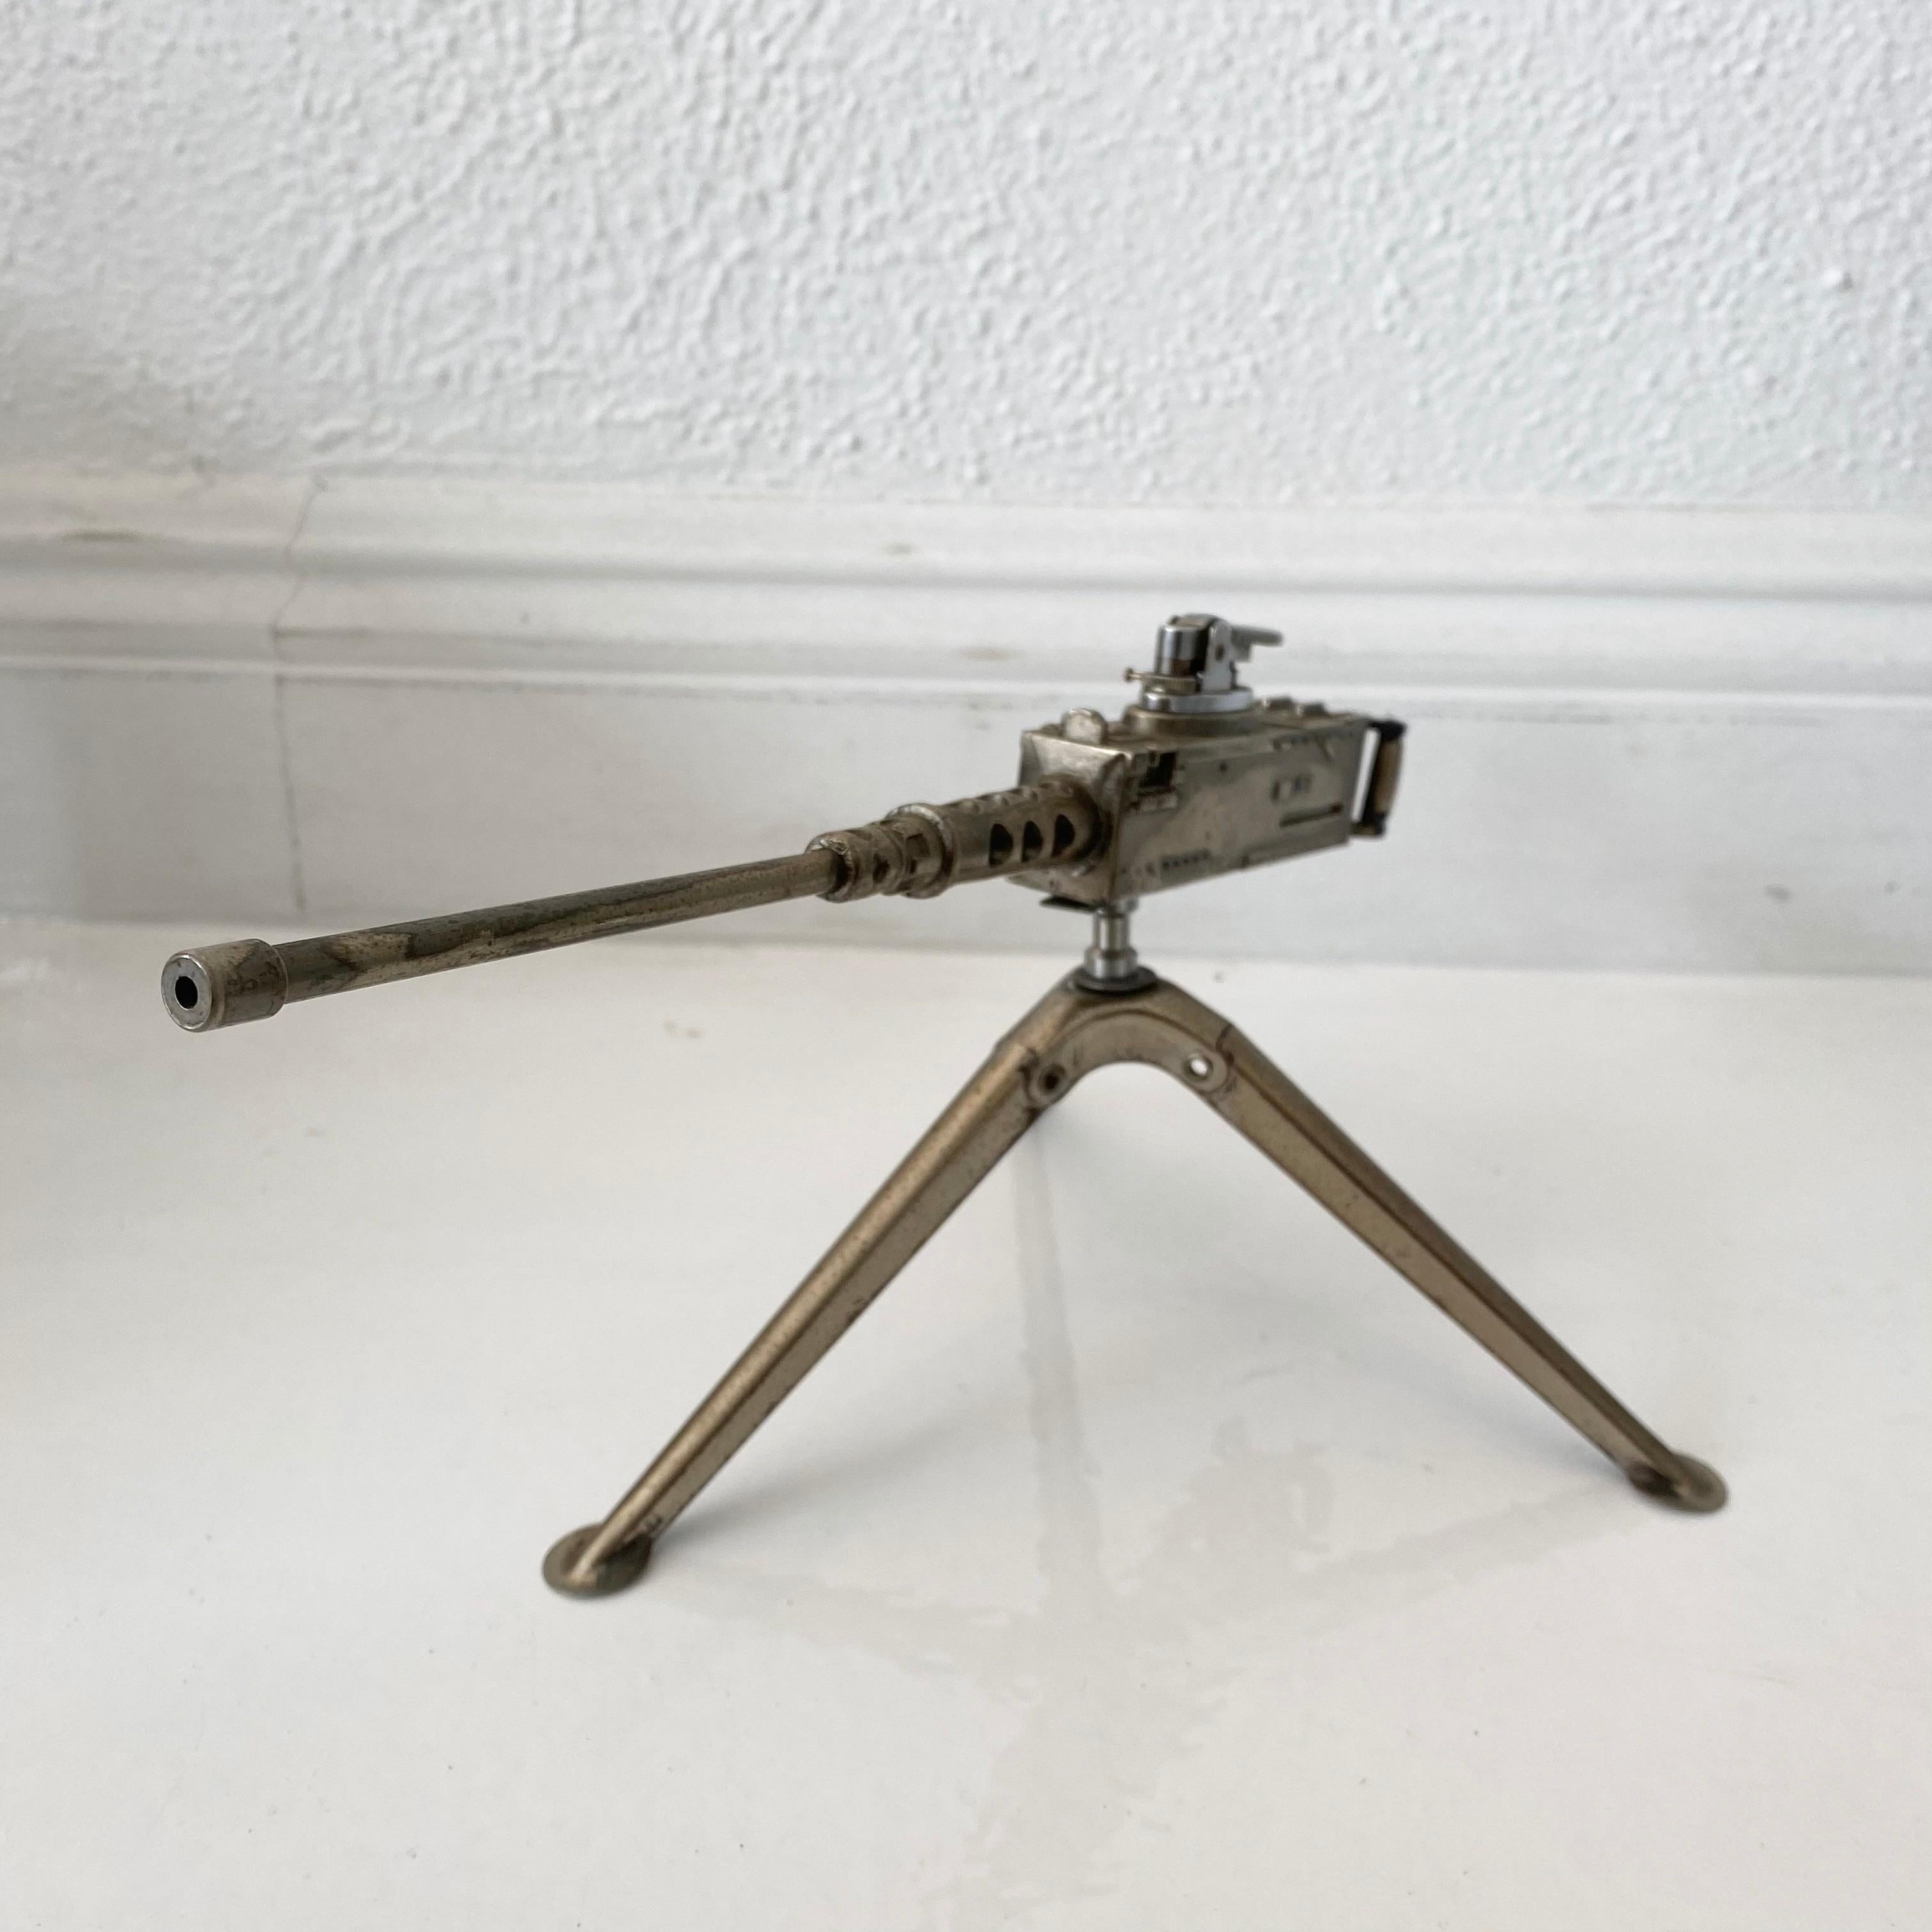 Cool vintage table lighter in the shape of a Browning M2 machine gun. Made of metal and rotates 360 degrees. Tripod arms fold up and down. Made in Japan. Cool tobacco accessory and conversation piece. Working lighter. Good vintage condition. Small